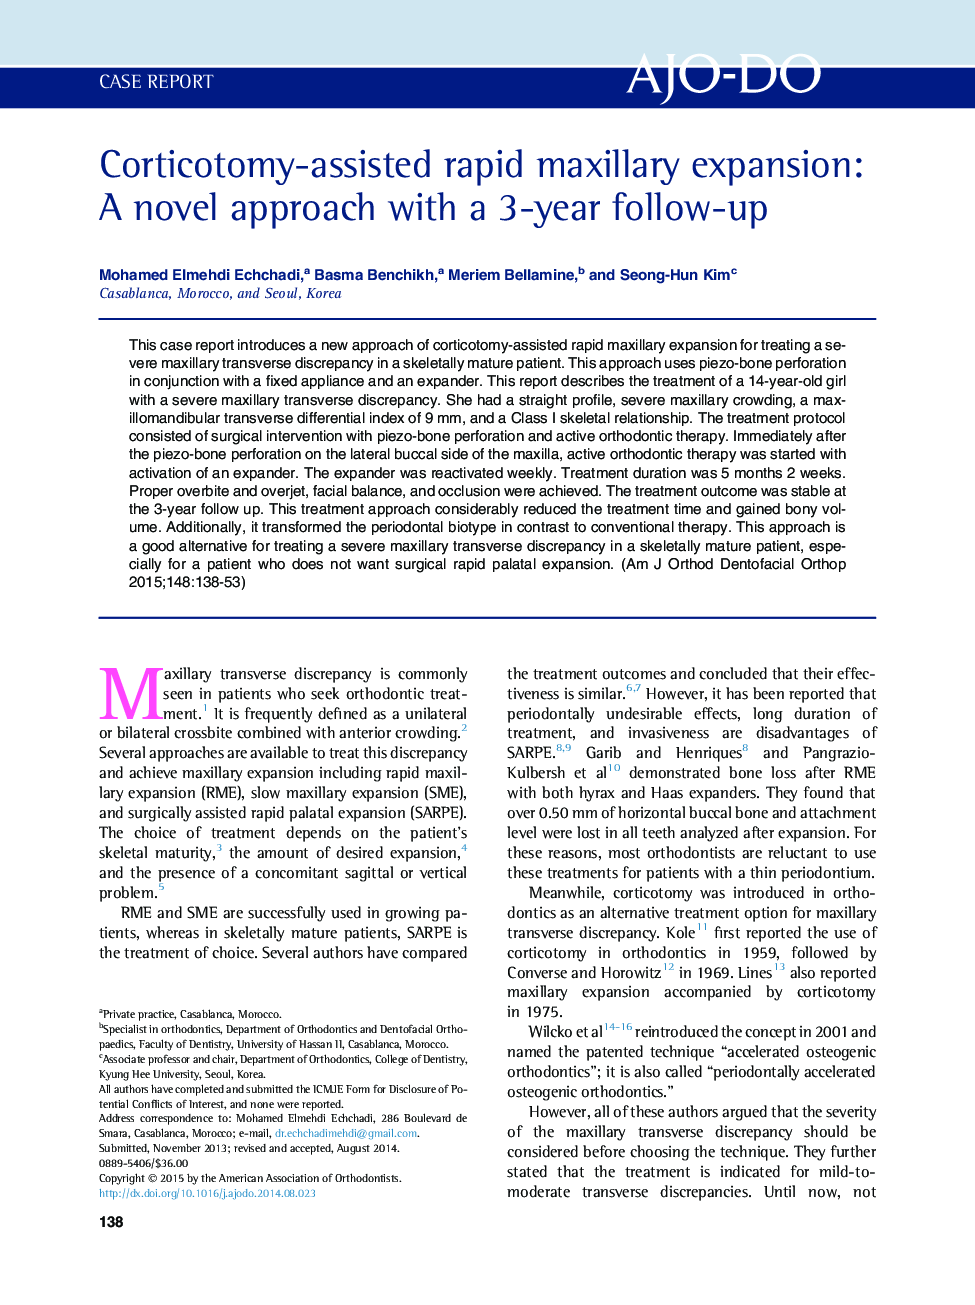 Corticotomy-assisted rapid maxillary expansion: A novel approach with a 3-year follow-up 